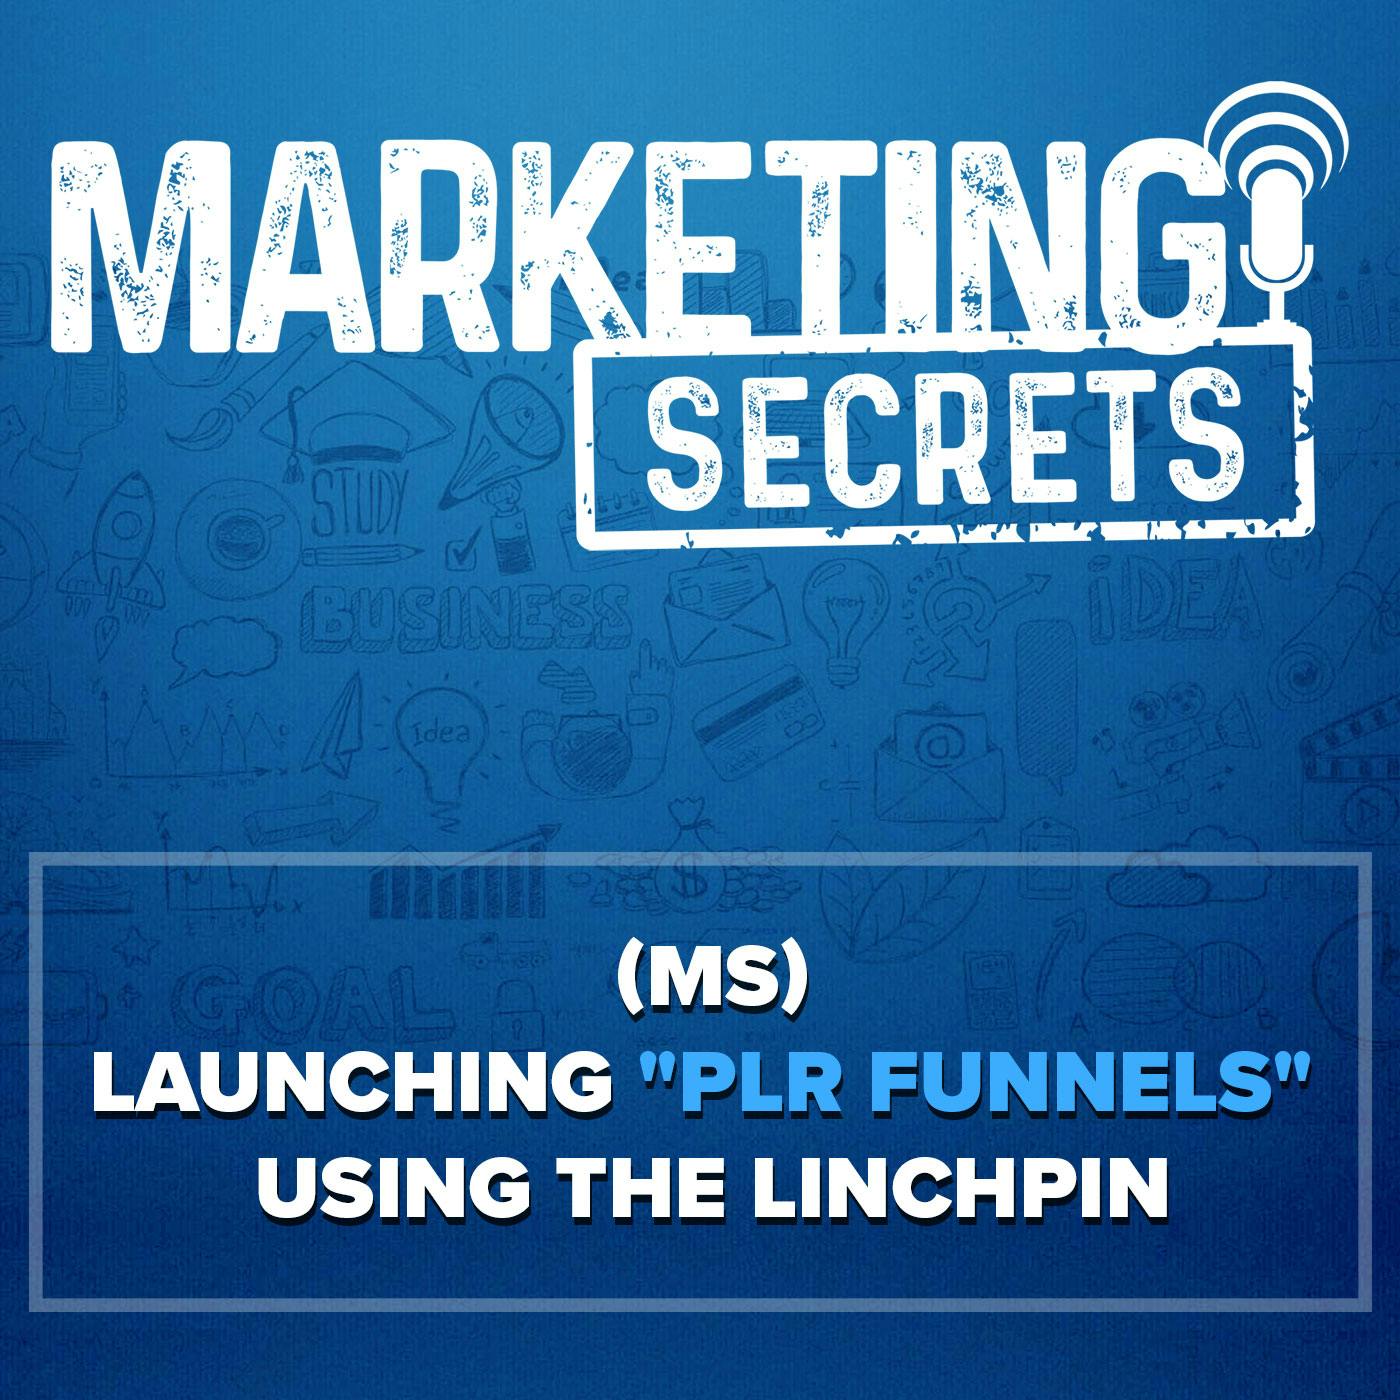 (MS) Launching “PLR Funnels” Using The Linchpin